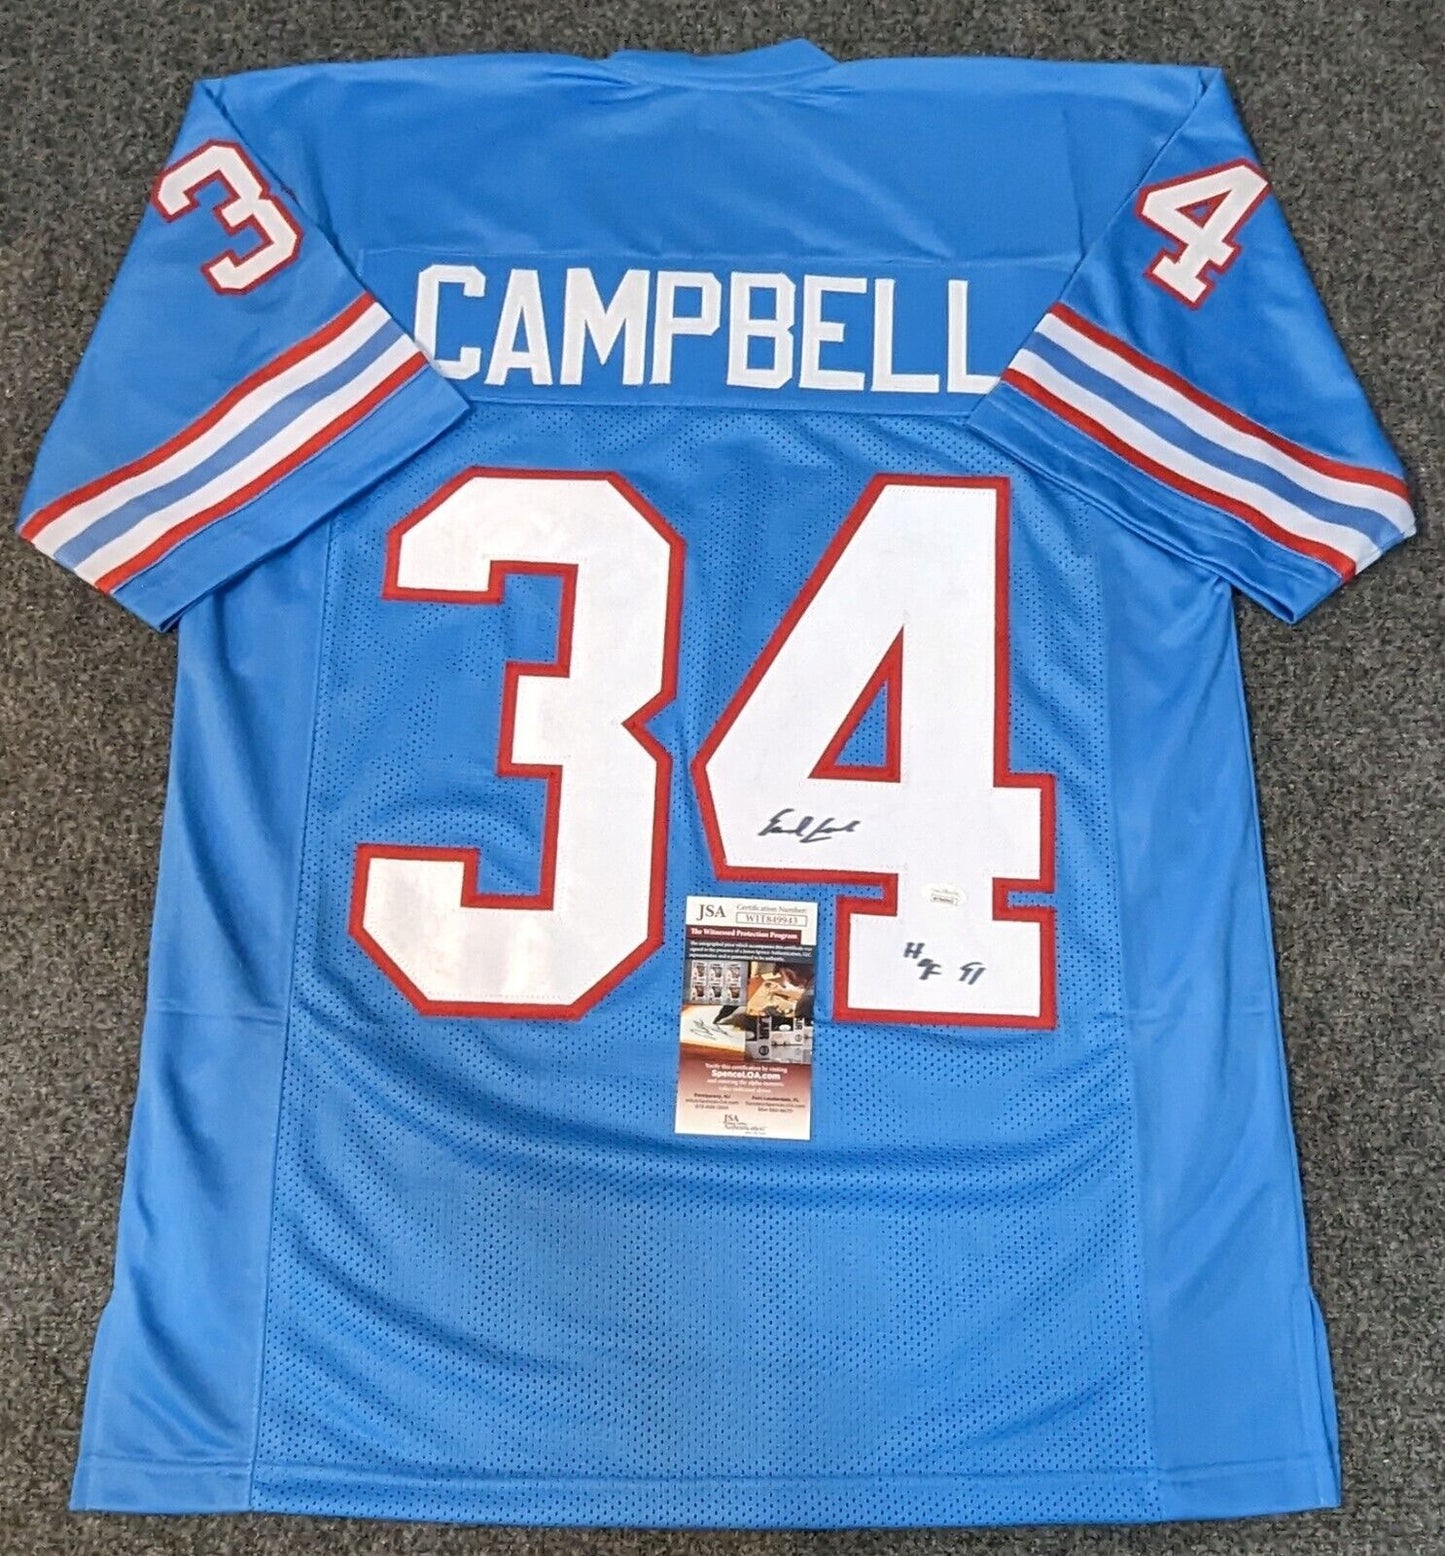 Earl Campbell Autographed Texas Longhorns Orange Jersey Inscribed HT 77  (JSA Authenticated)